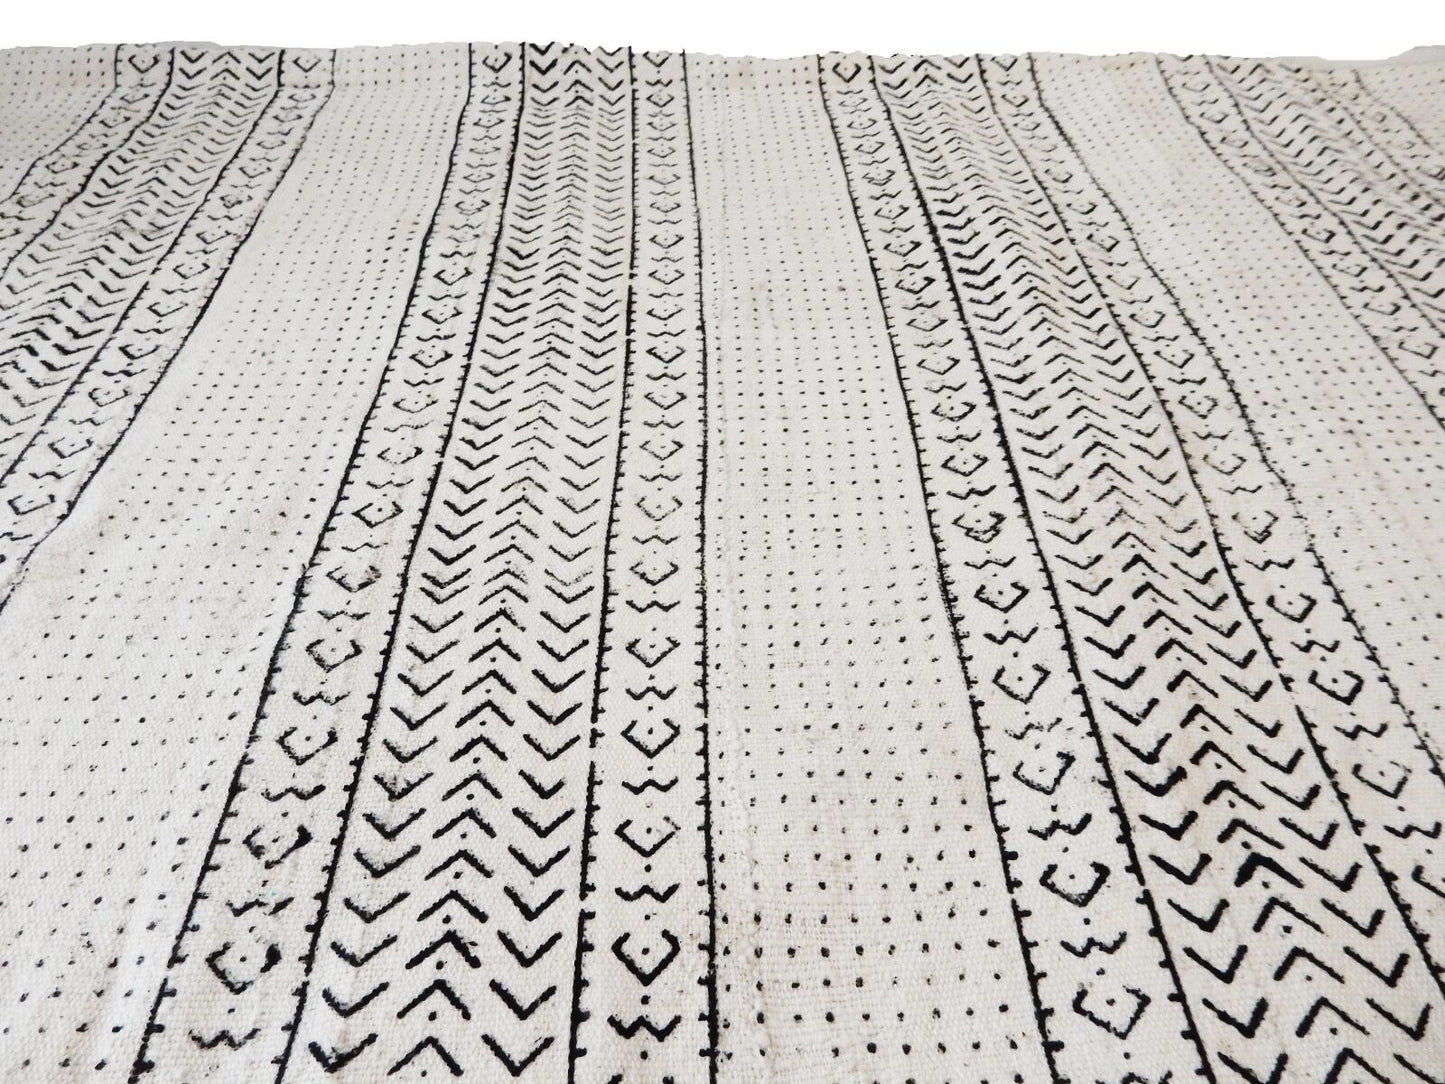 African Large Black & White Mud Cloth Textile Mali 84" by 62" # 1962